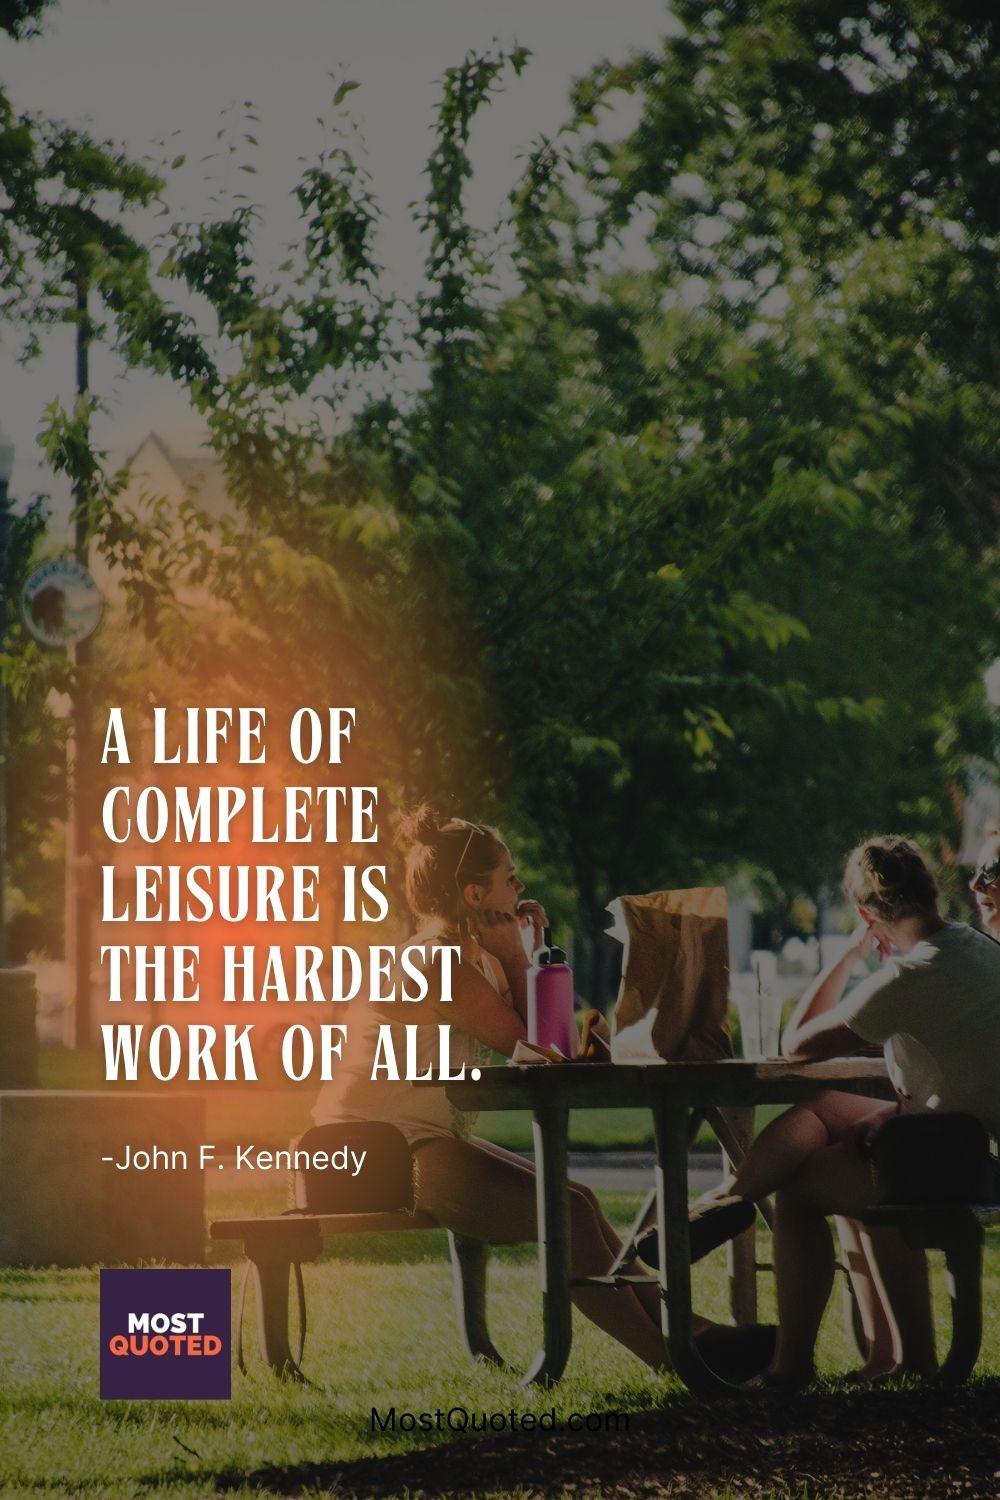 A life of complete leisure is the hardest work of all. - John F. Kennedy